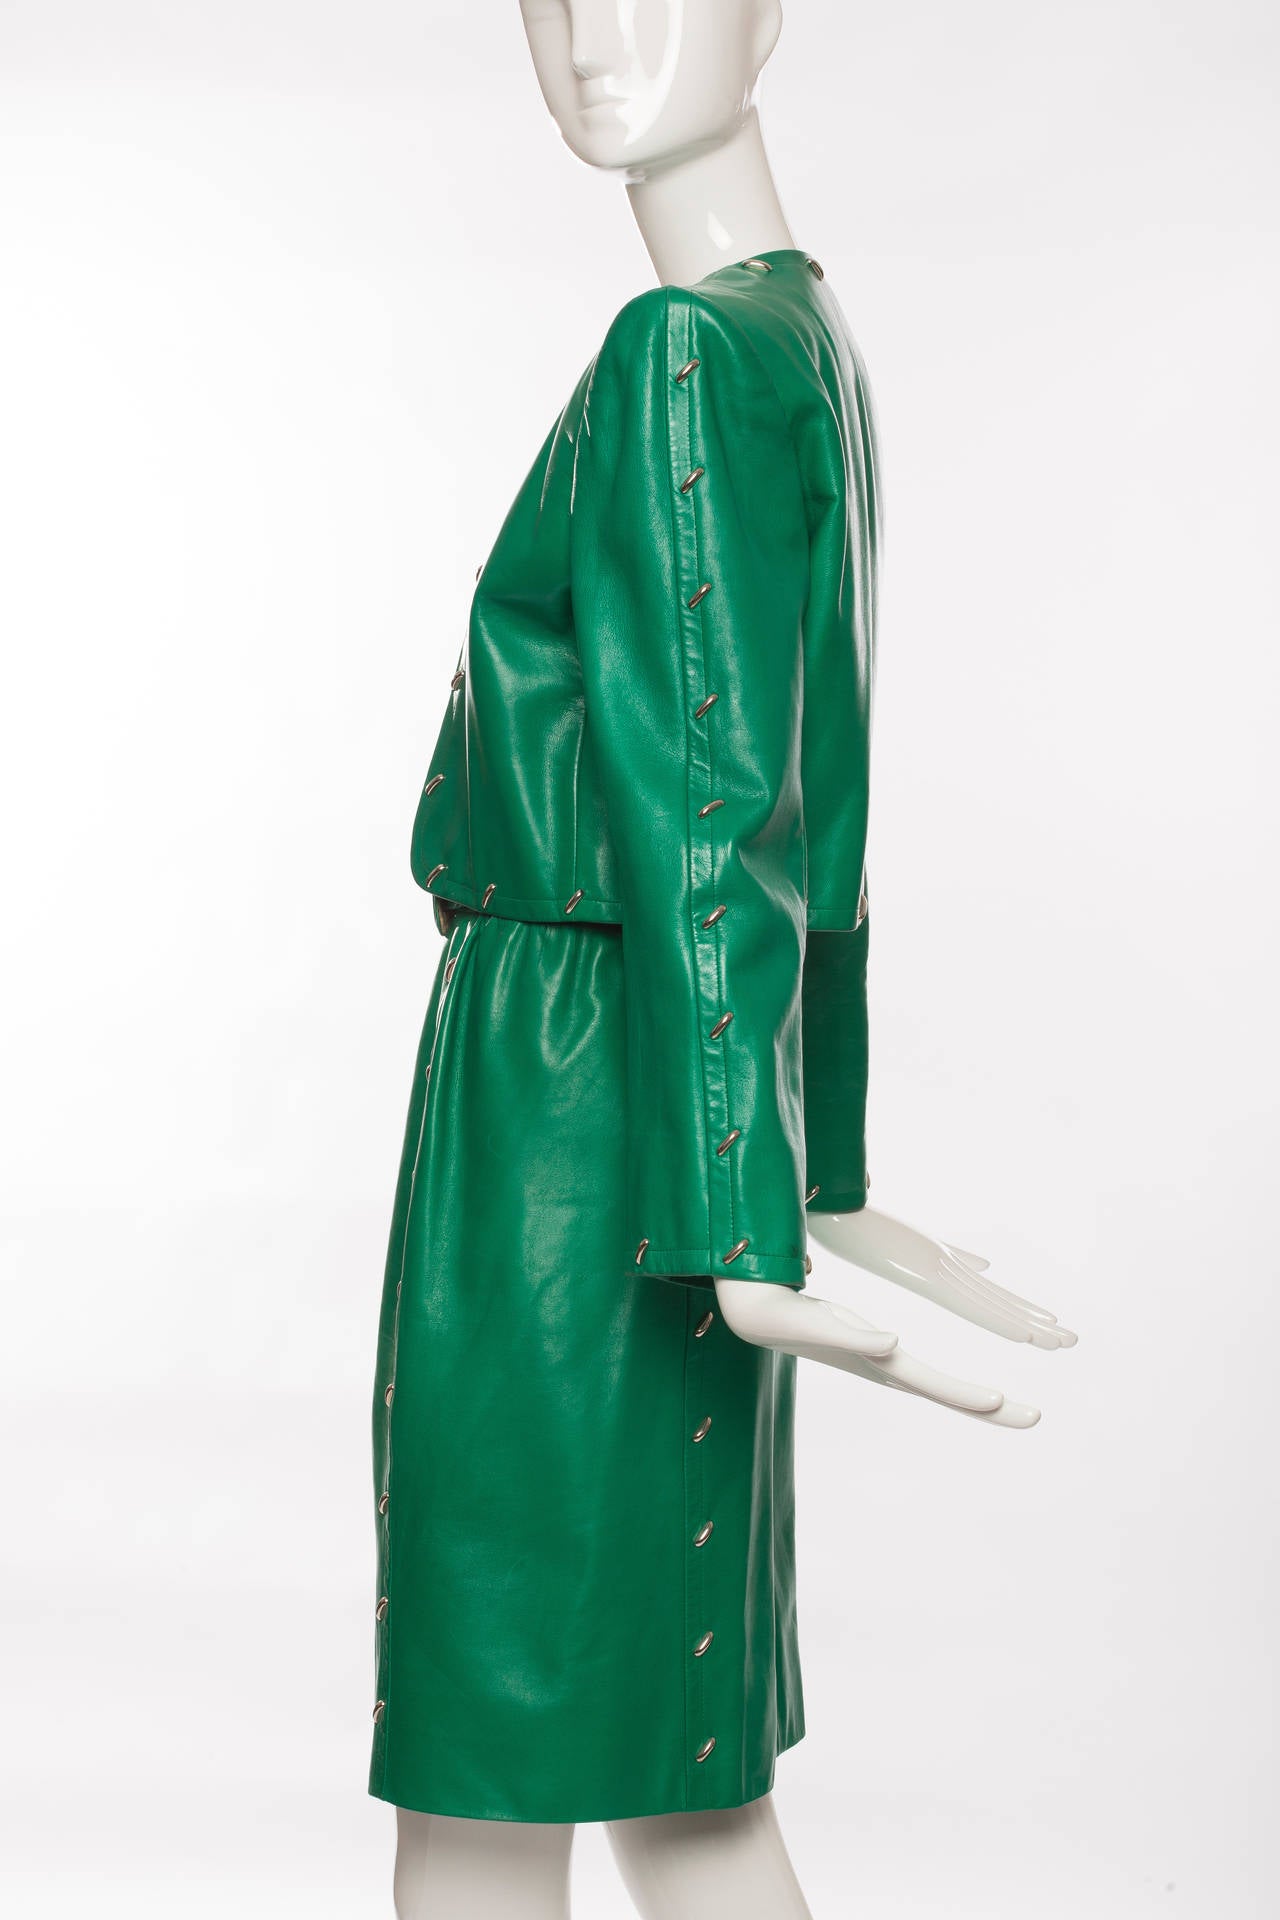 Givenchy Couture, Circa 1980's leather skirt suit with silver stud embellishment, fully lined in silk and skirt has side zip closure and self belt.